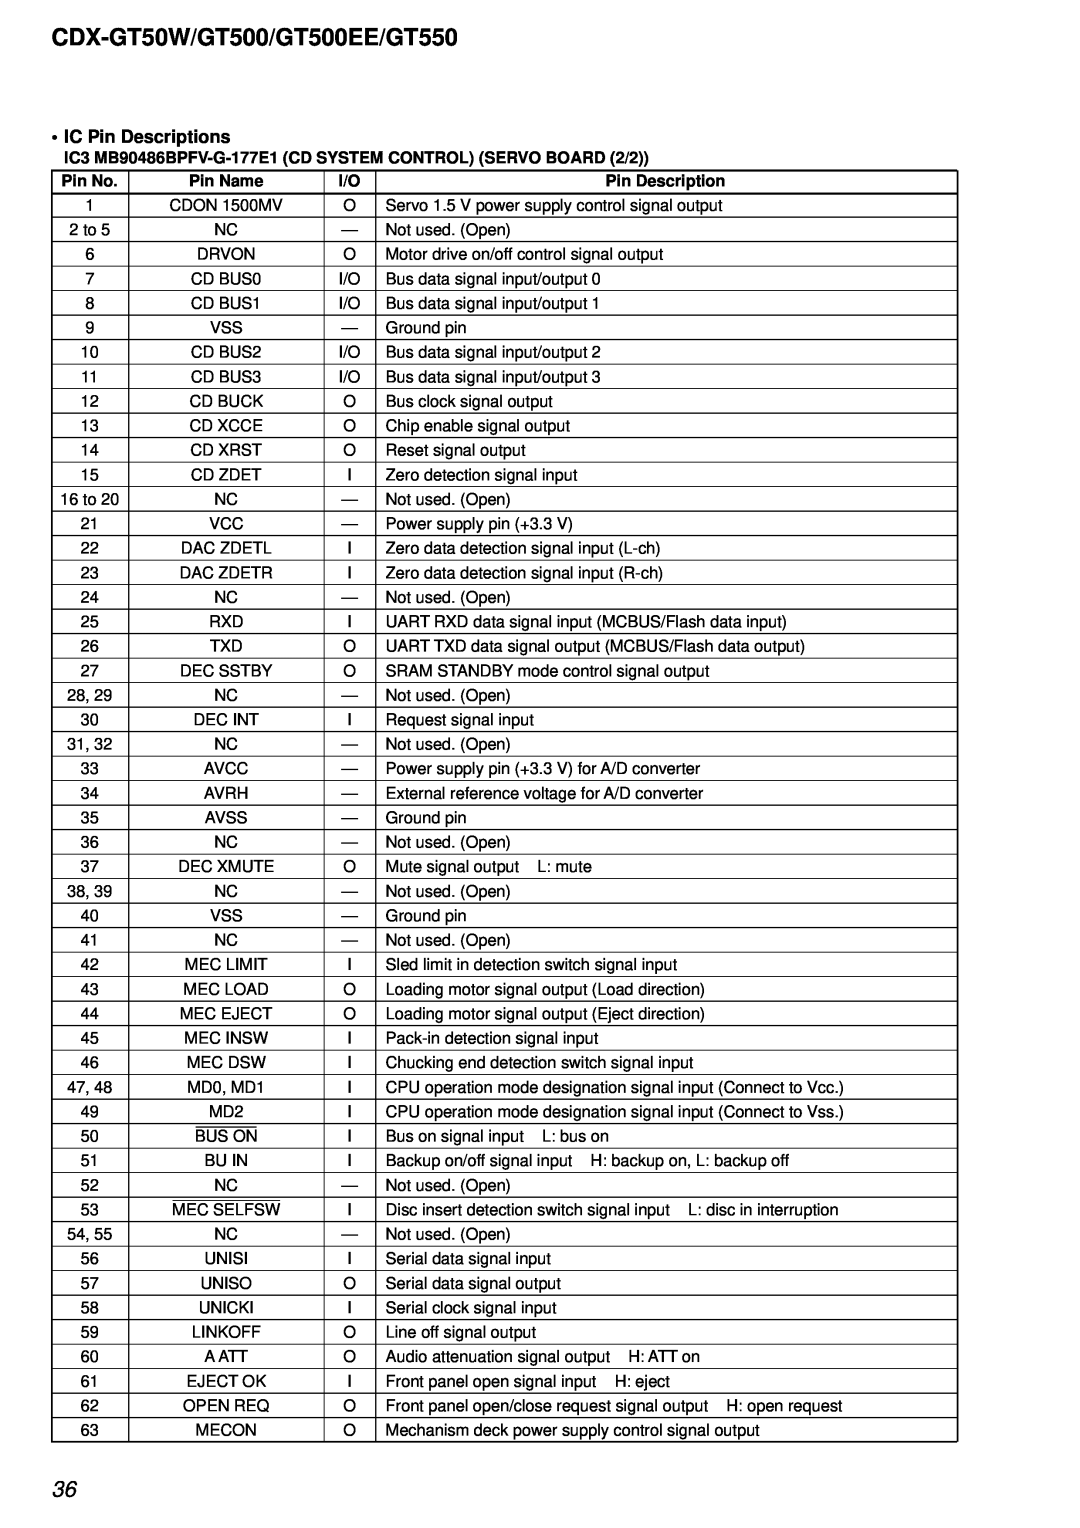 Sony CDX-GT500EE, CDX-GT550 service manual IC Pin Descriptions, CDX-GT50W/GT500/GT500EE/GT550, Pin No, Pin Name 